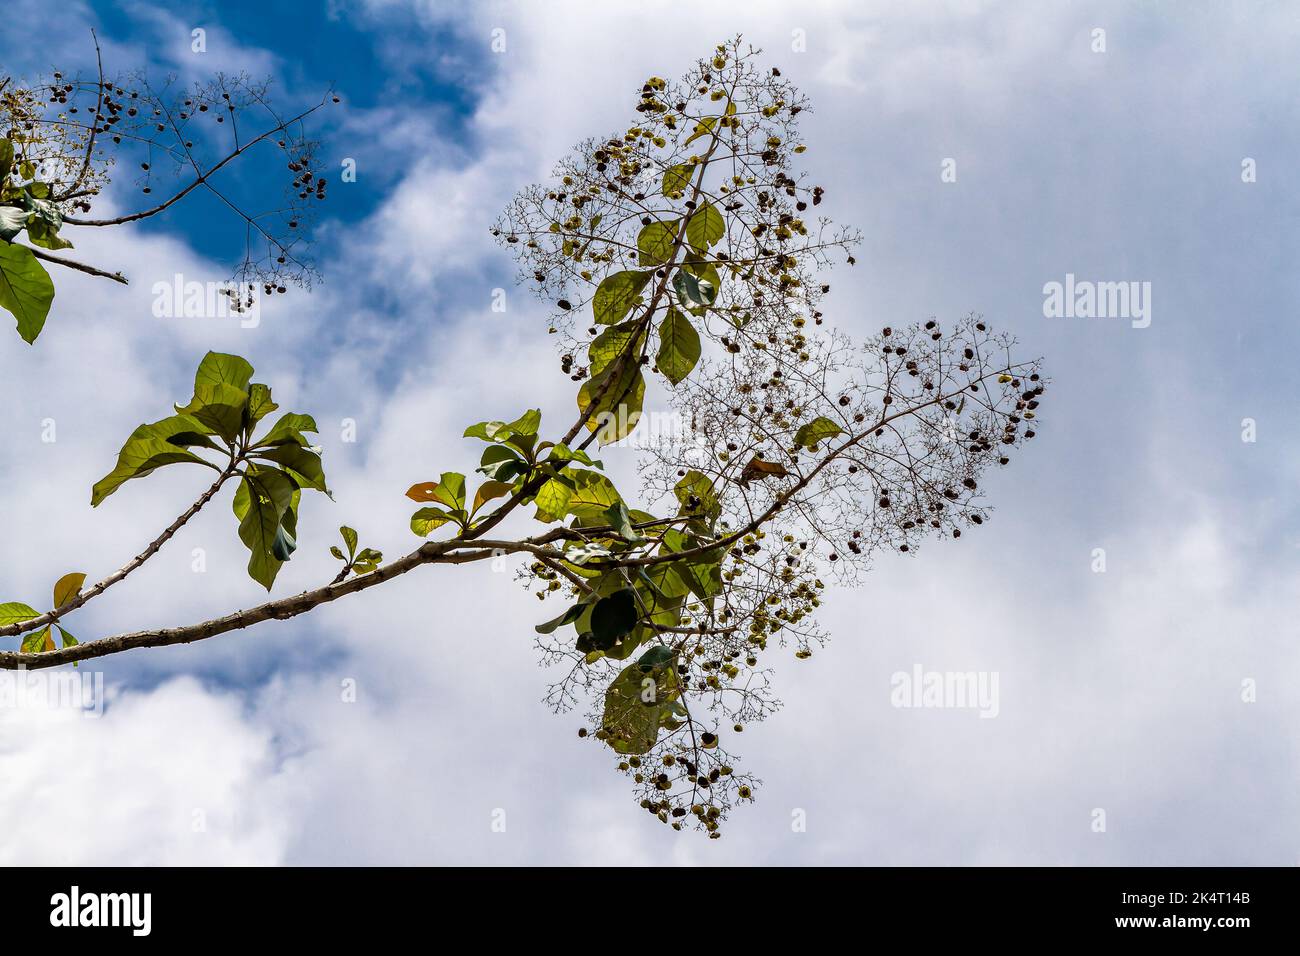 A sprig of a teak tree branch whose leaves are oval and green, isolated on a bright white sky background Stock Photo